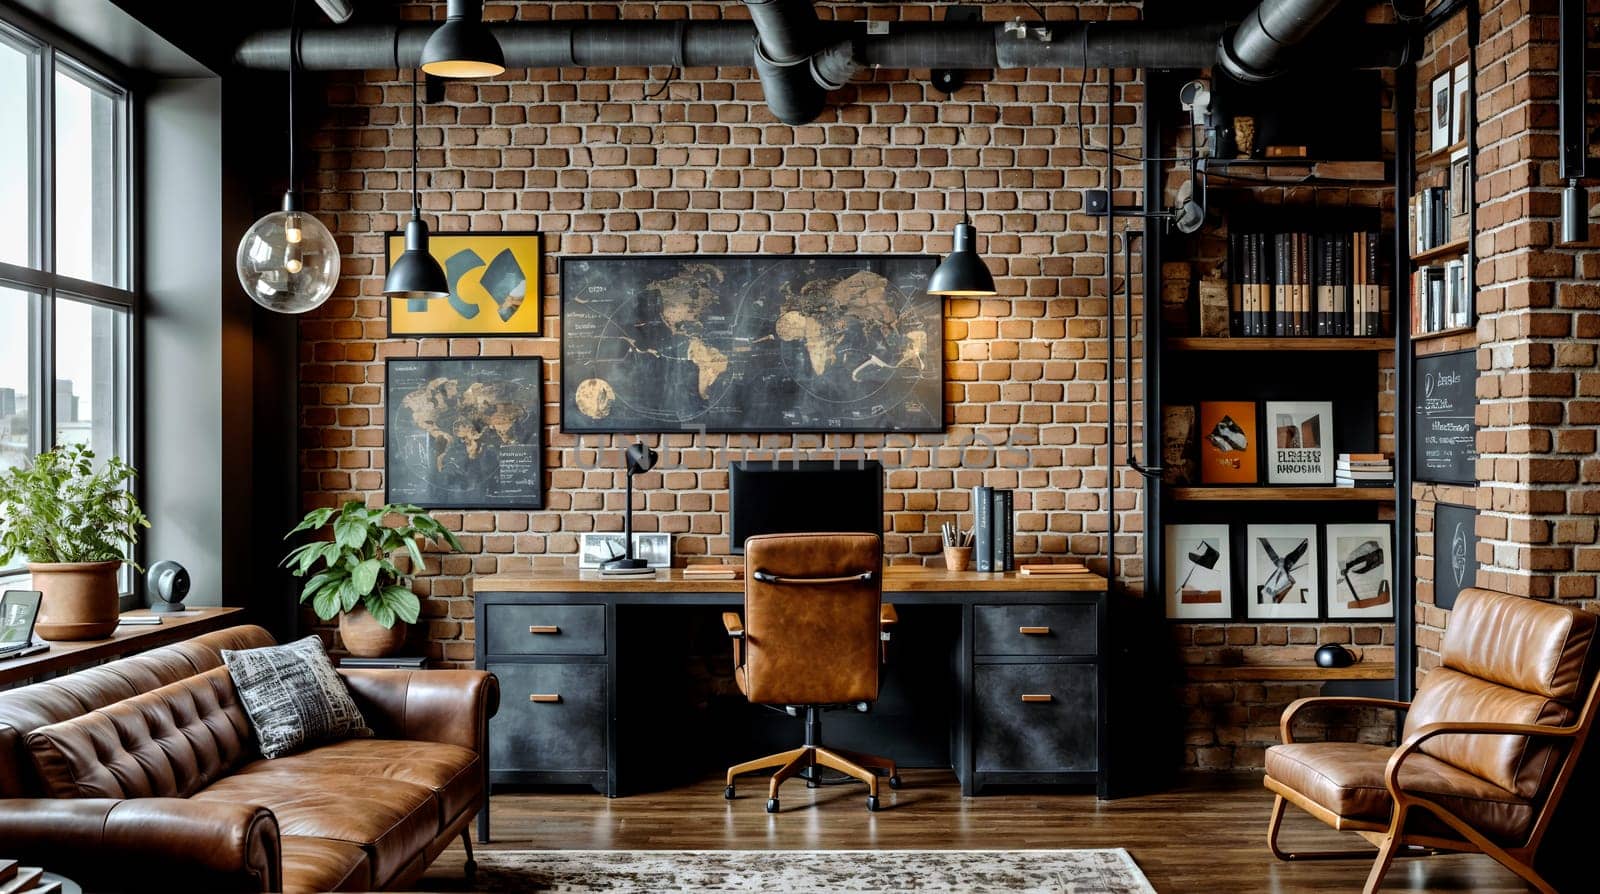 Stylish industrial Home Office With Exposed Brick and Designer Furniture by chrisroll